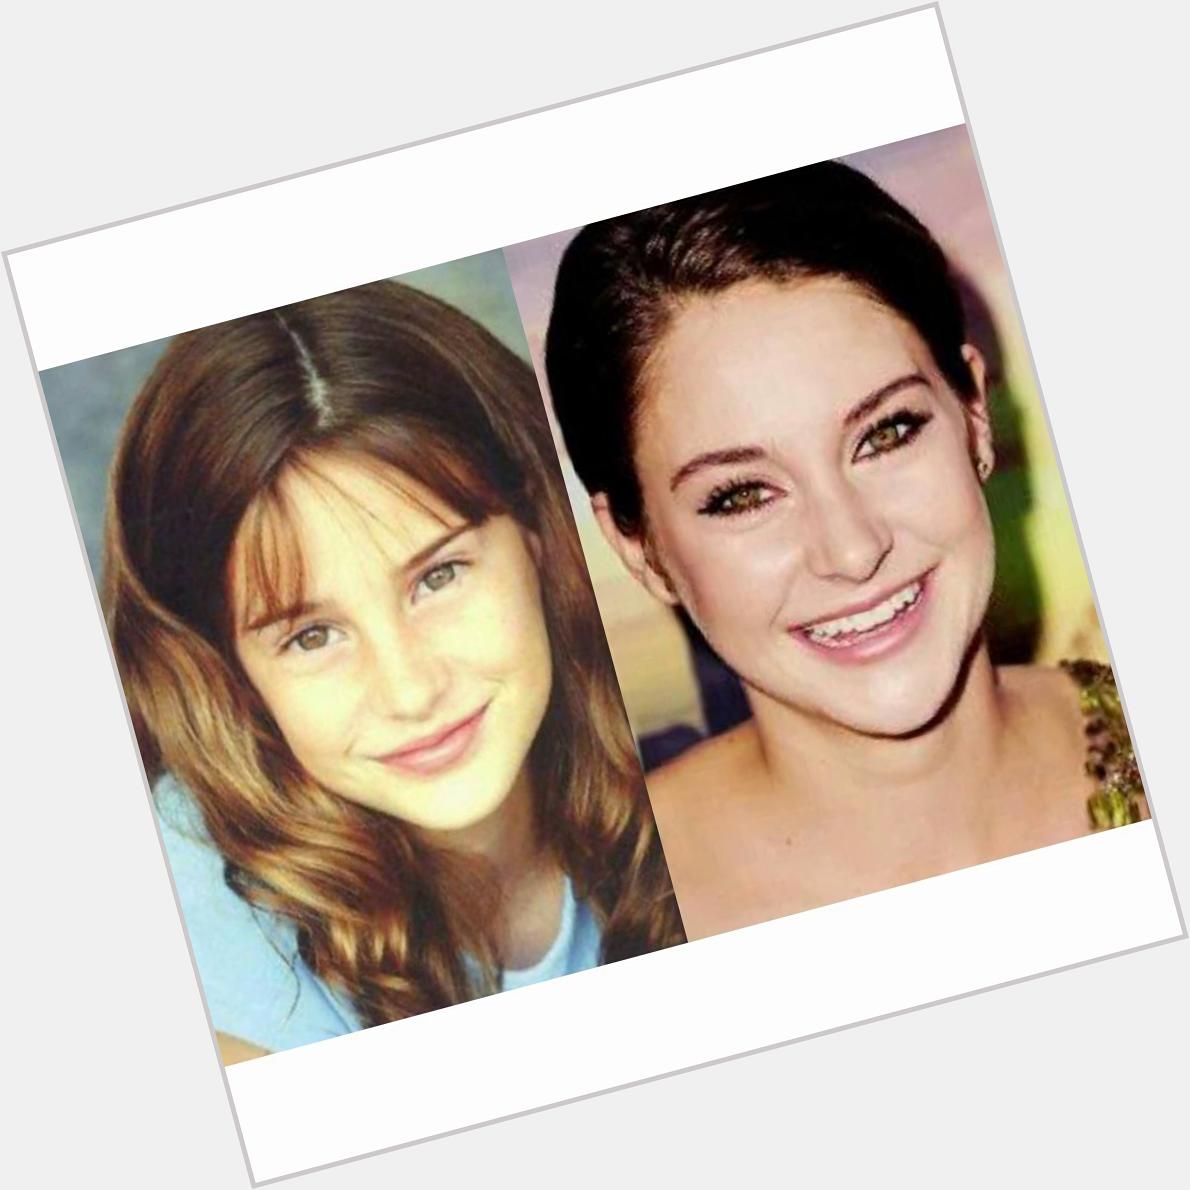 HAPPY BDAY TO ONE OF MY FAVOURITE ACTRESS, SHAILENE WOODLEY, +23  